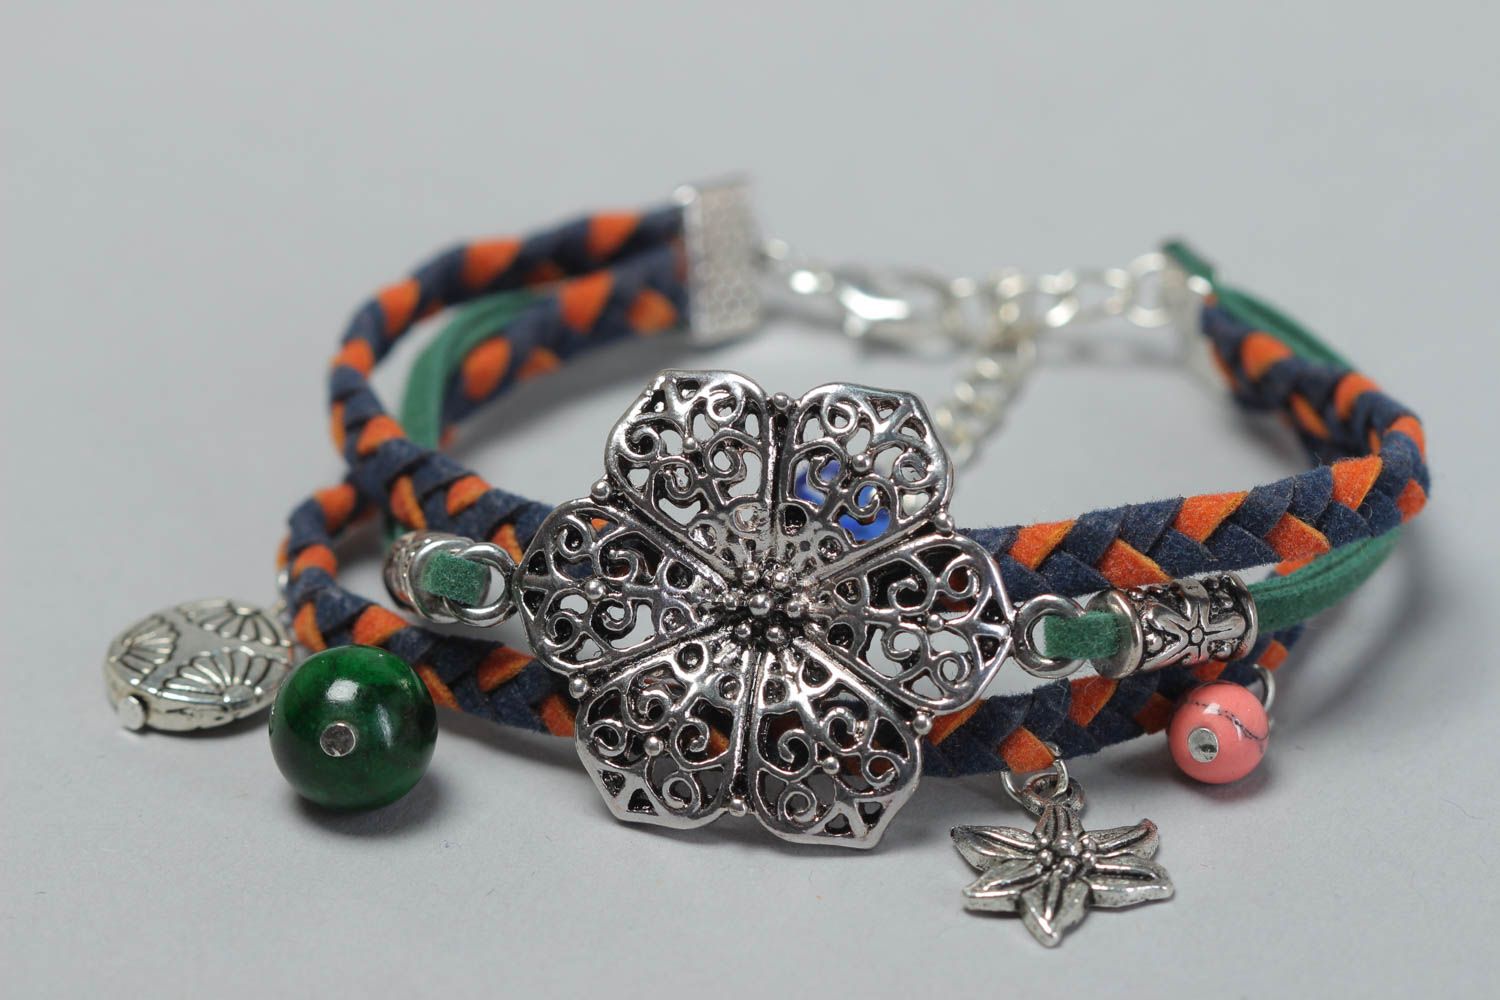 Handmade leather bracelet with charms fashion accessories jewelry designs photo 3